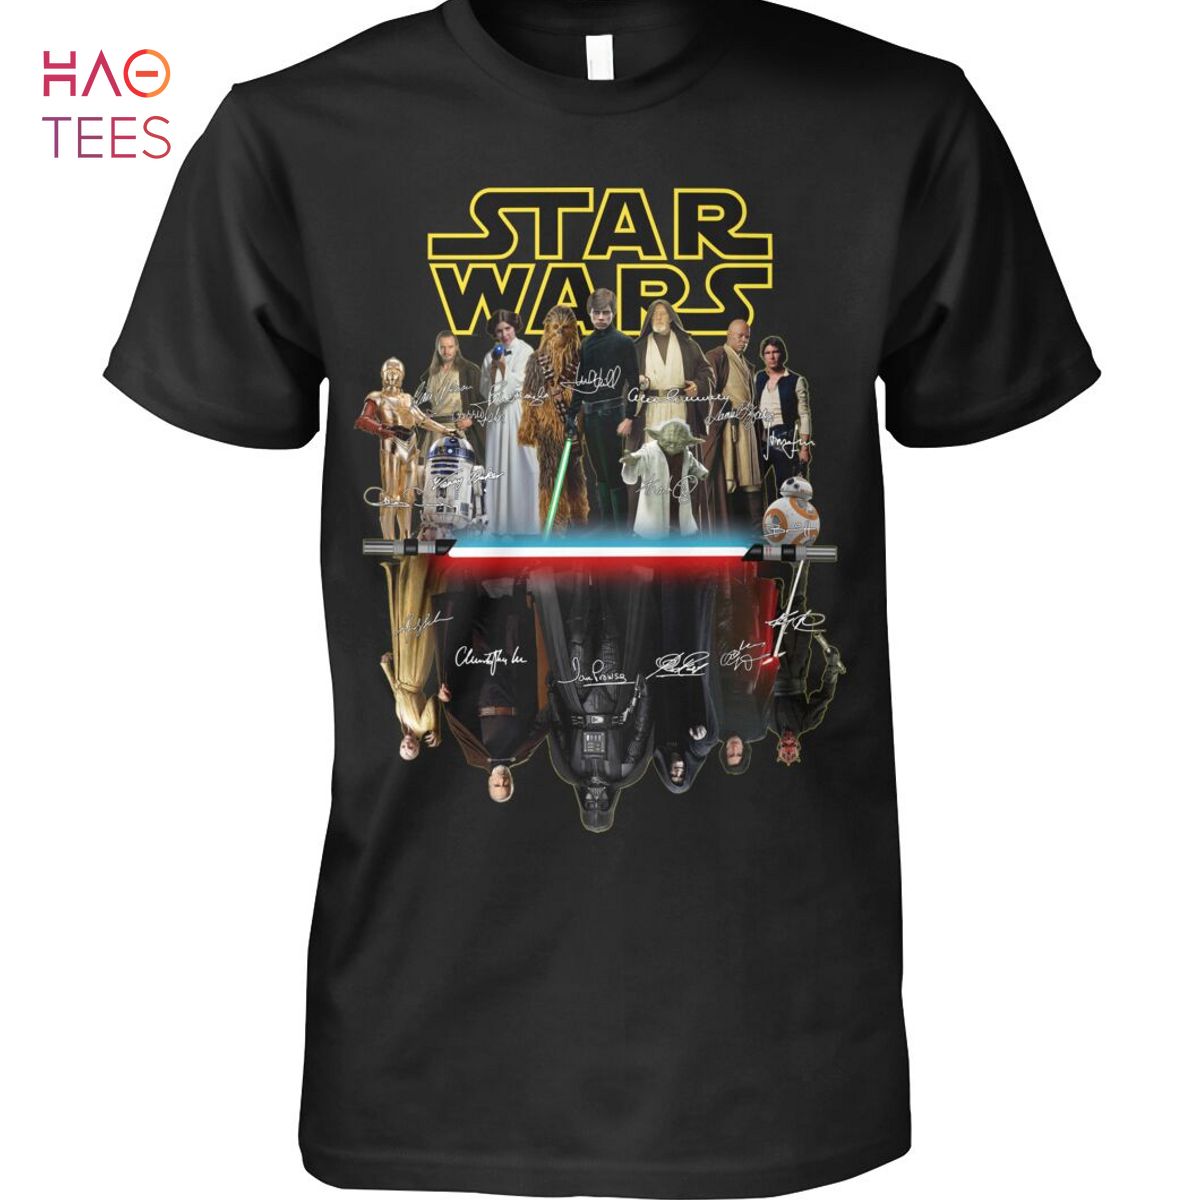 THE BEST Star Wars Shirt Limited Edition